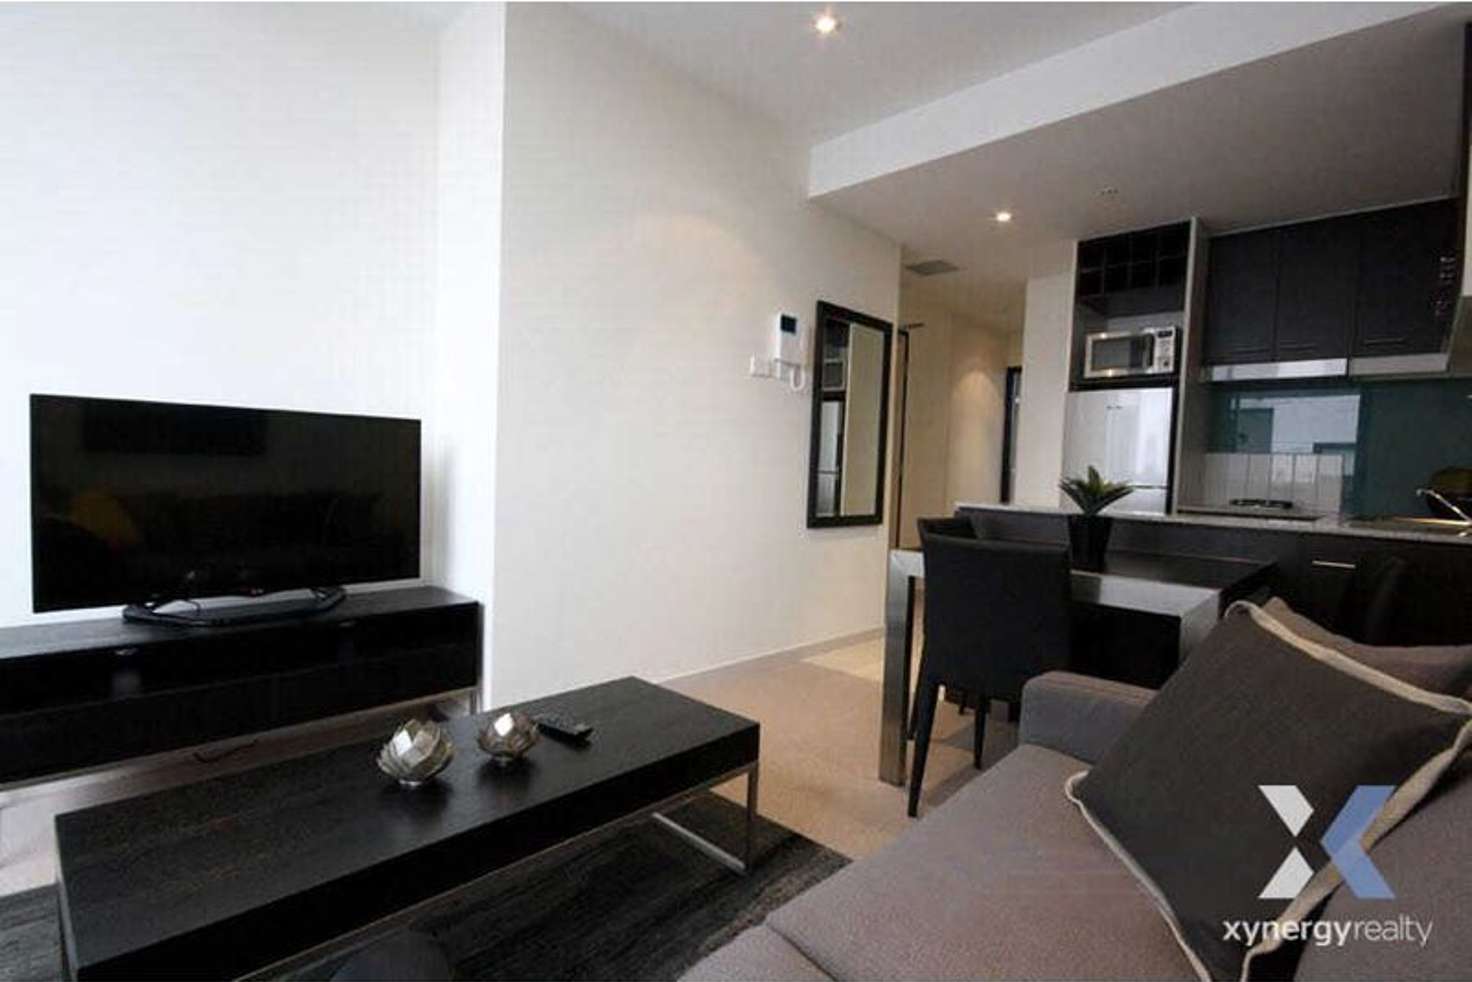 Main view of Homely apartment listing, 614/613 Swanston St, Carlton VIC 3053